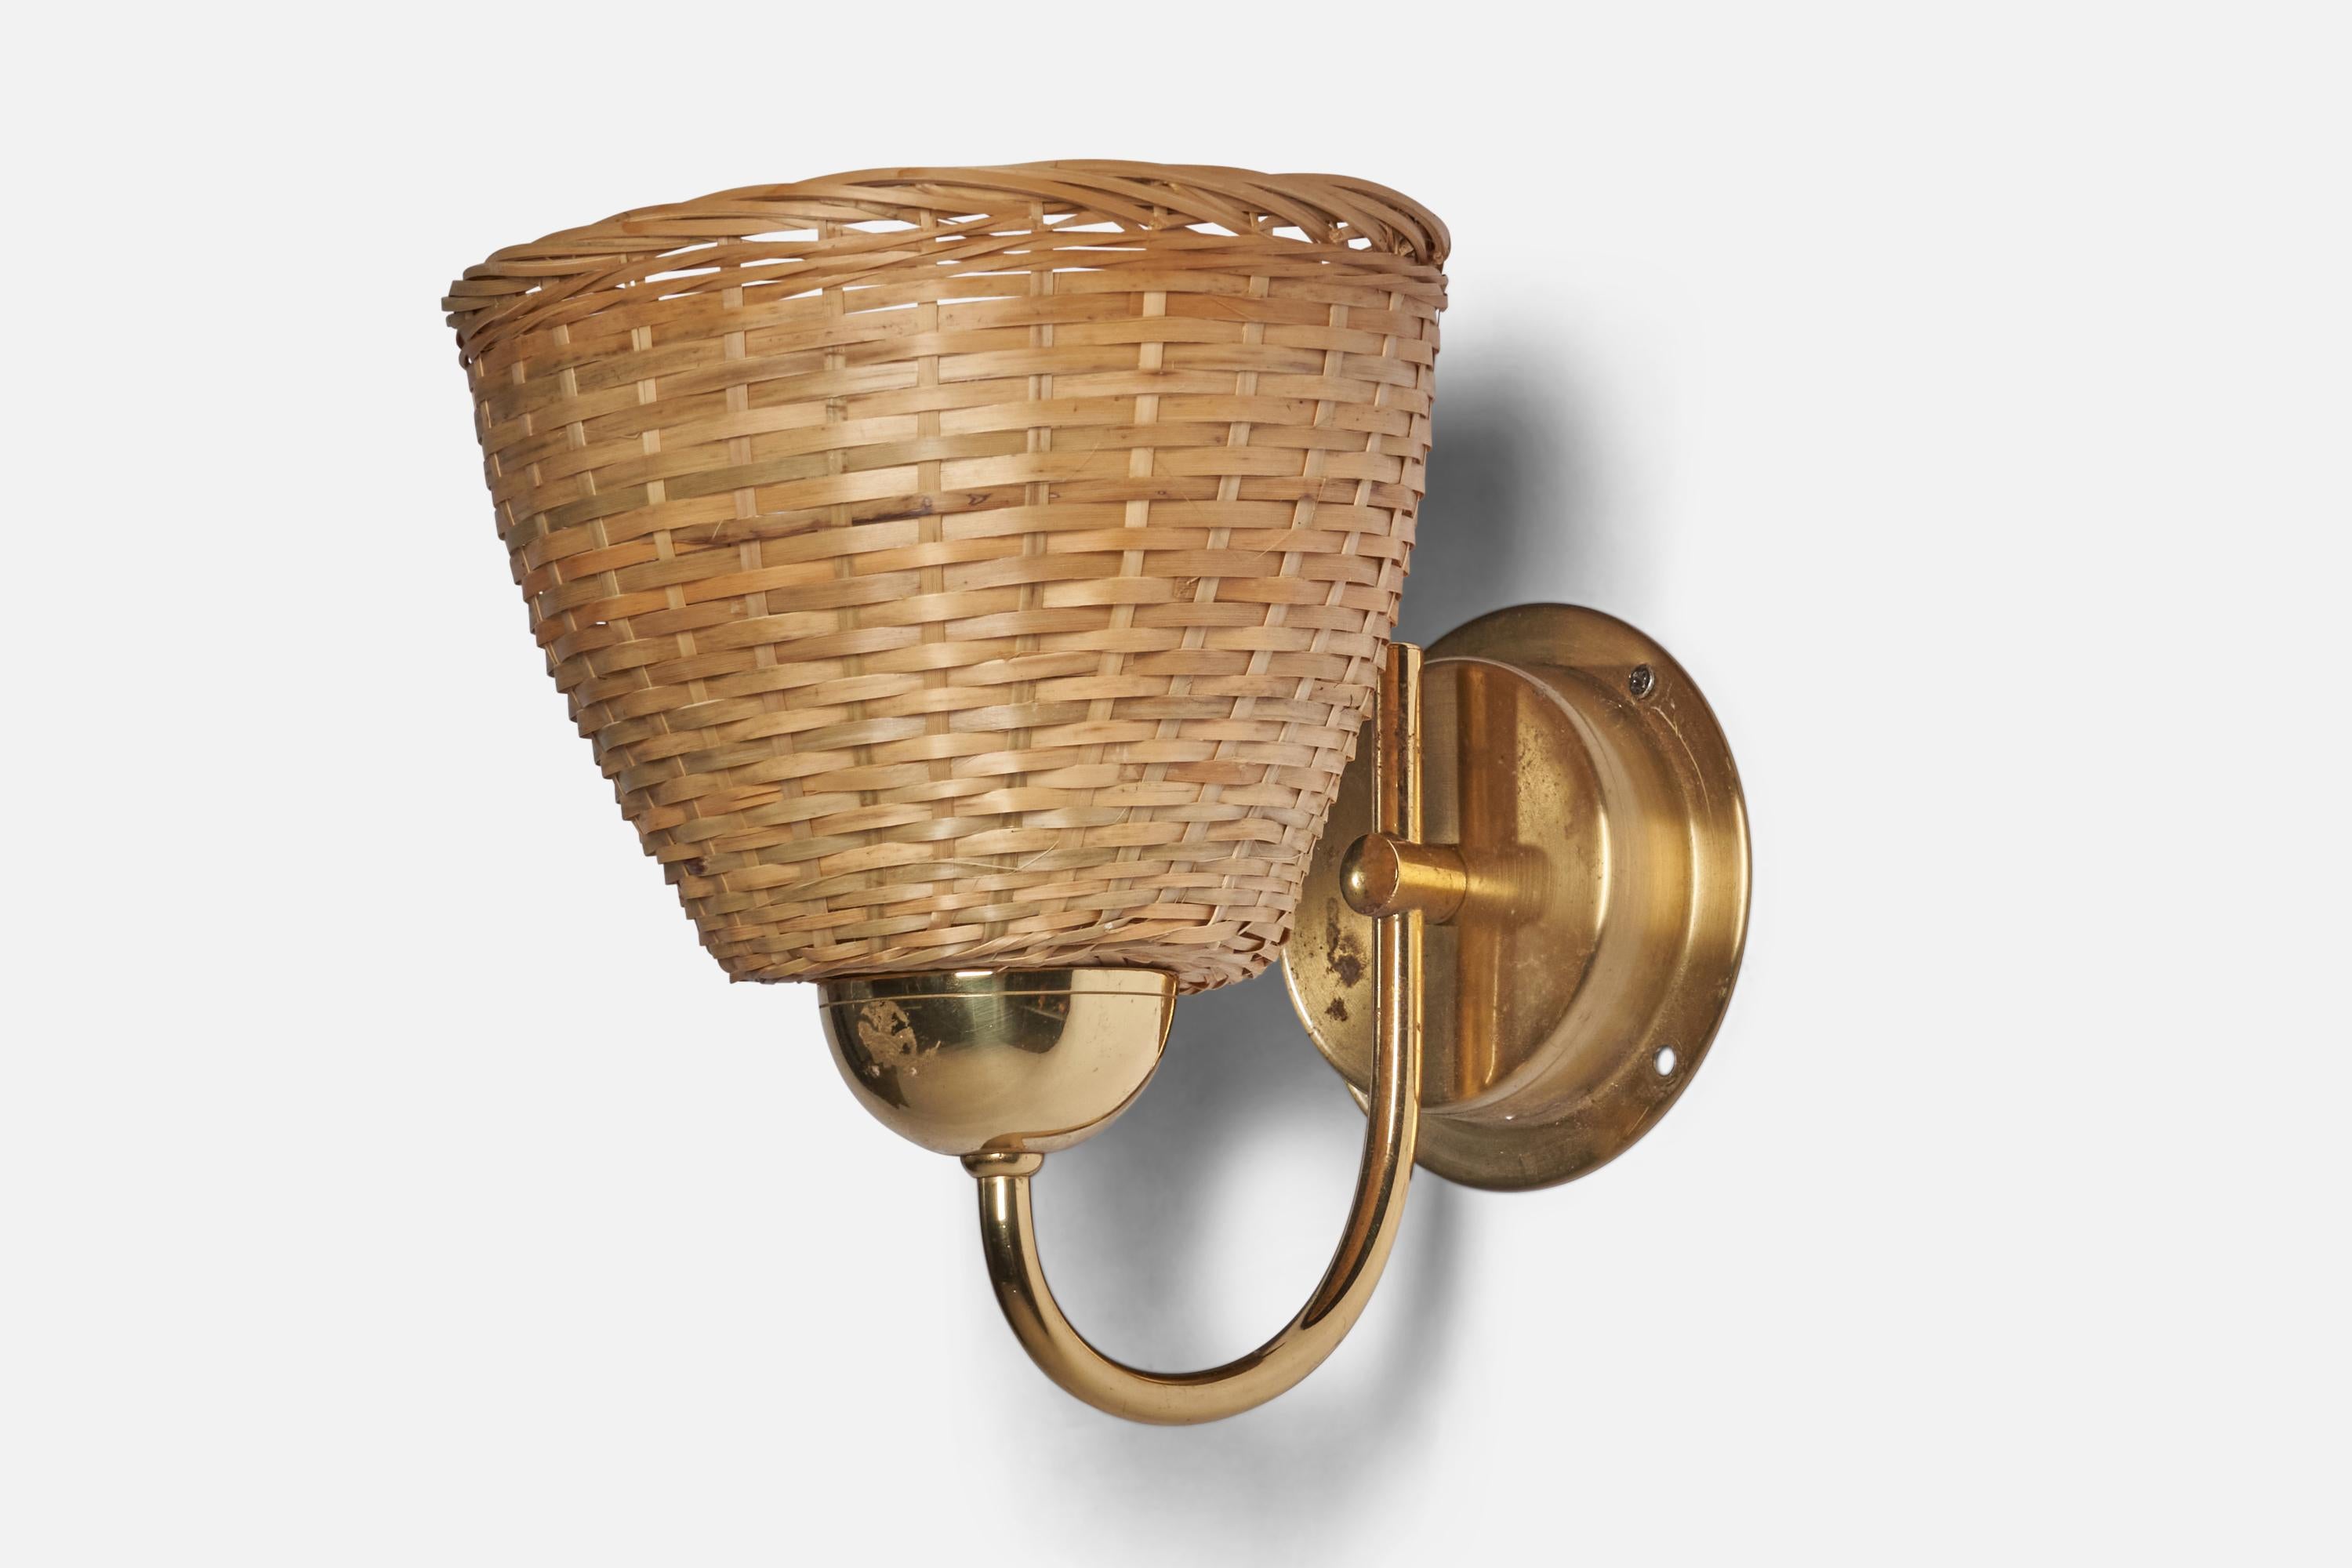 A brass and rattan wall light designed and produced by Ewå Värnamo, Sweden, c. 1960s.

Overall Dimensions (inches): 8” H x 7” W x 10” D
Back Plate Dimensions (inches): 4.2” Diameter
Bulb Specifications: E-26 Bulb
Number of Sockets: 1
All lighting